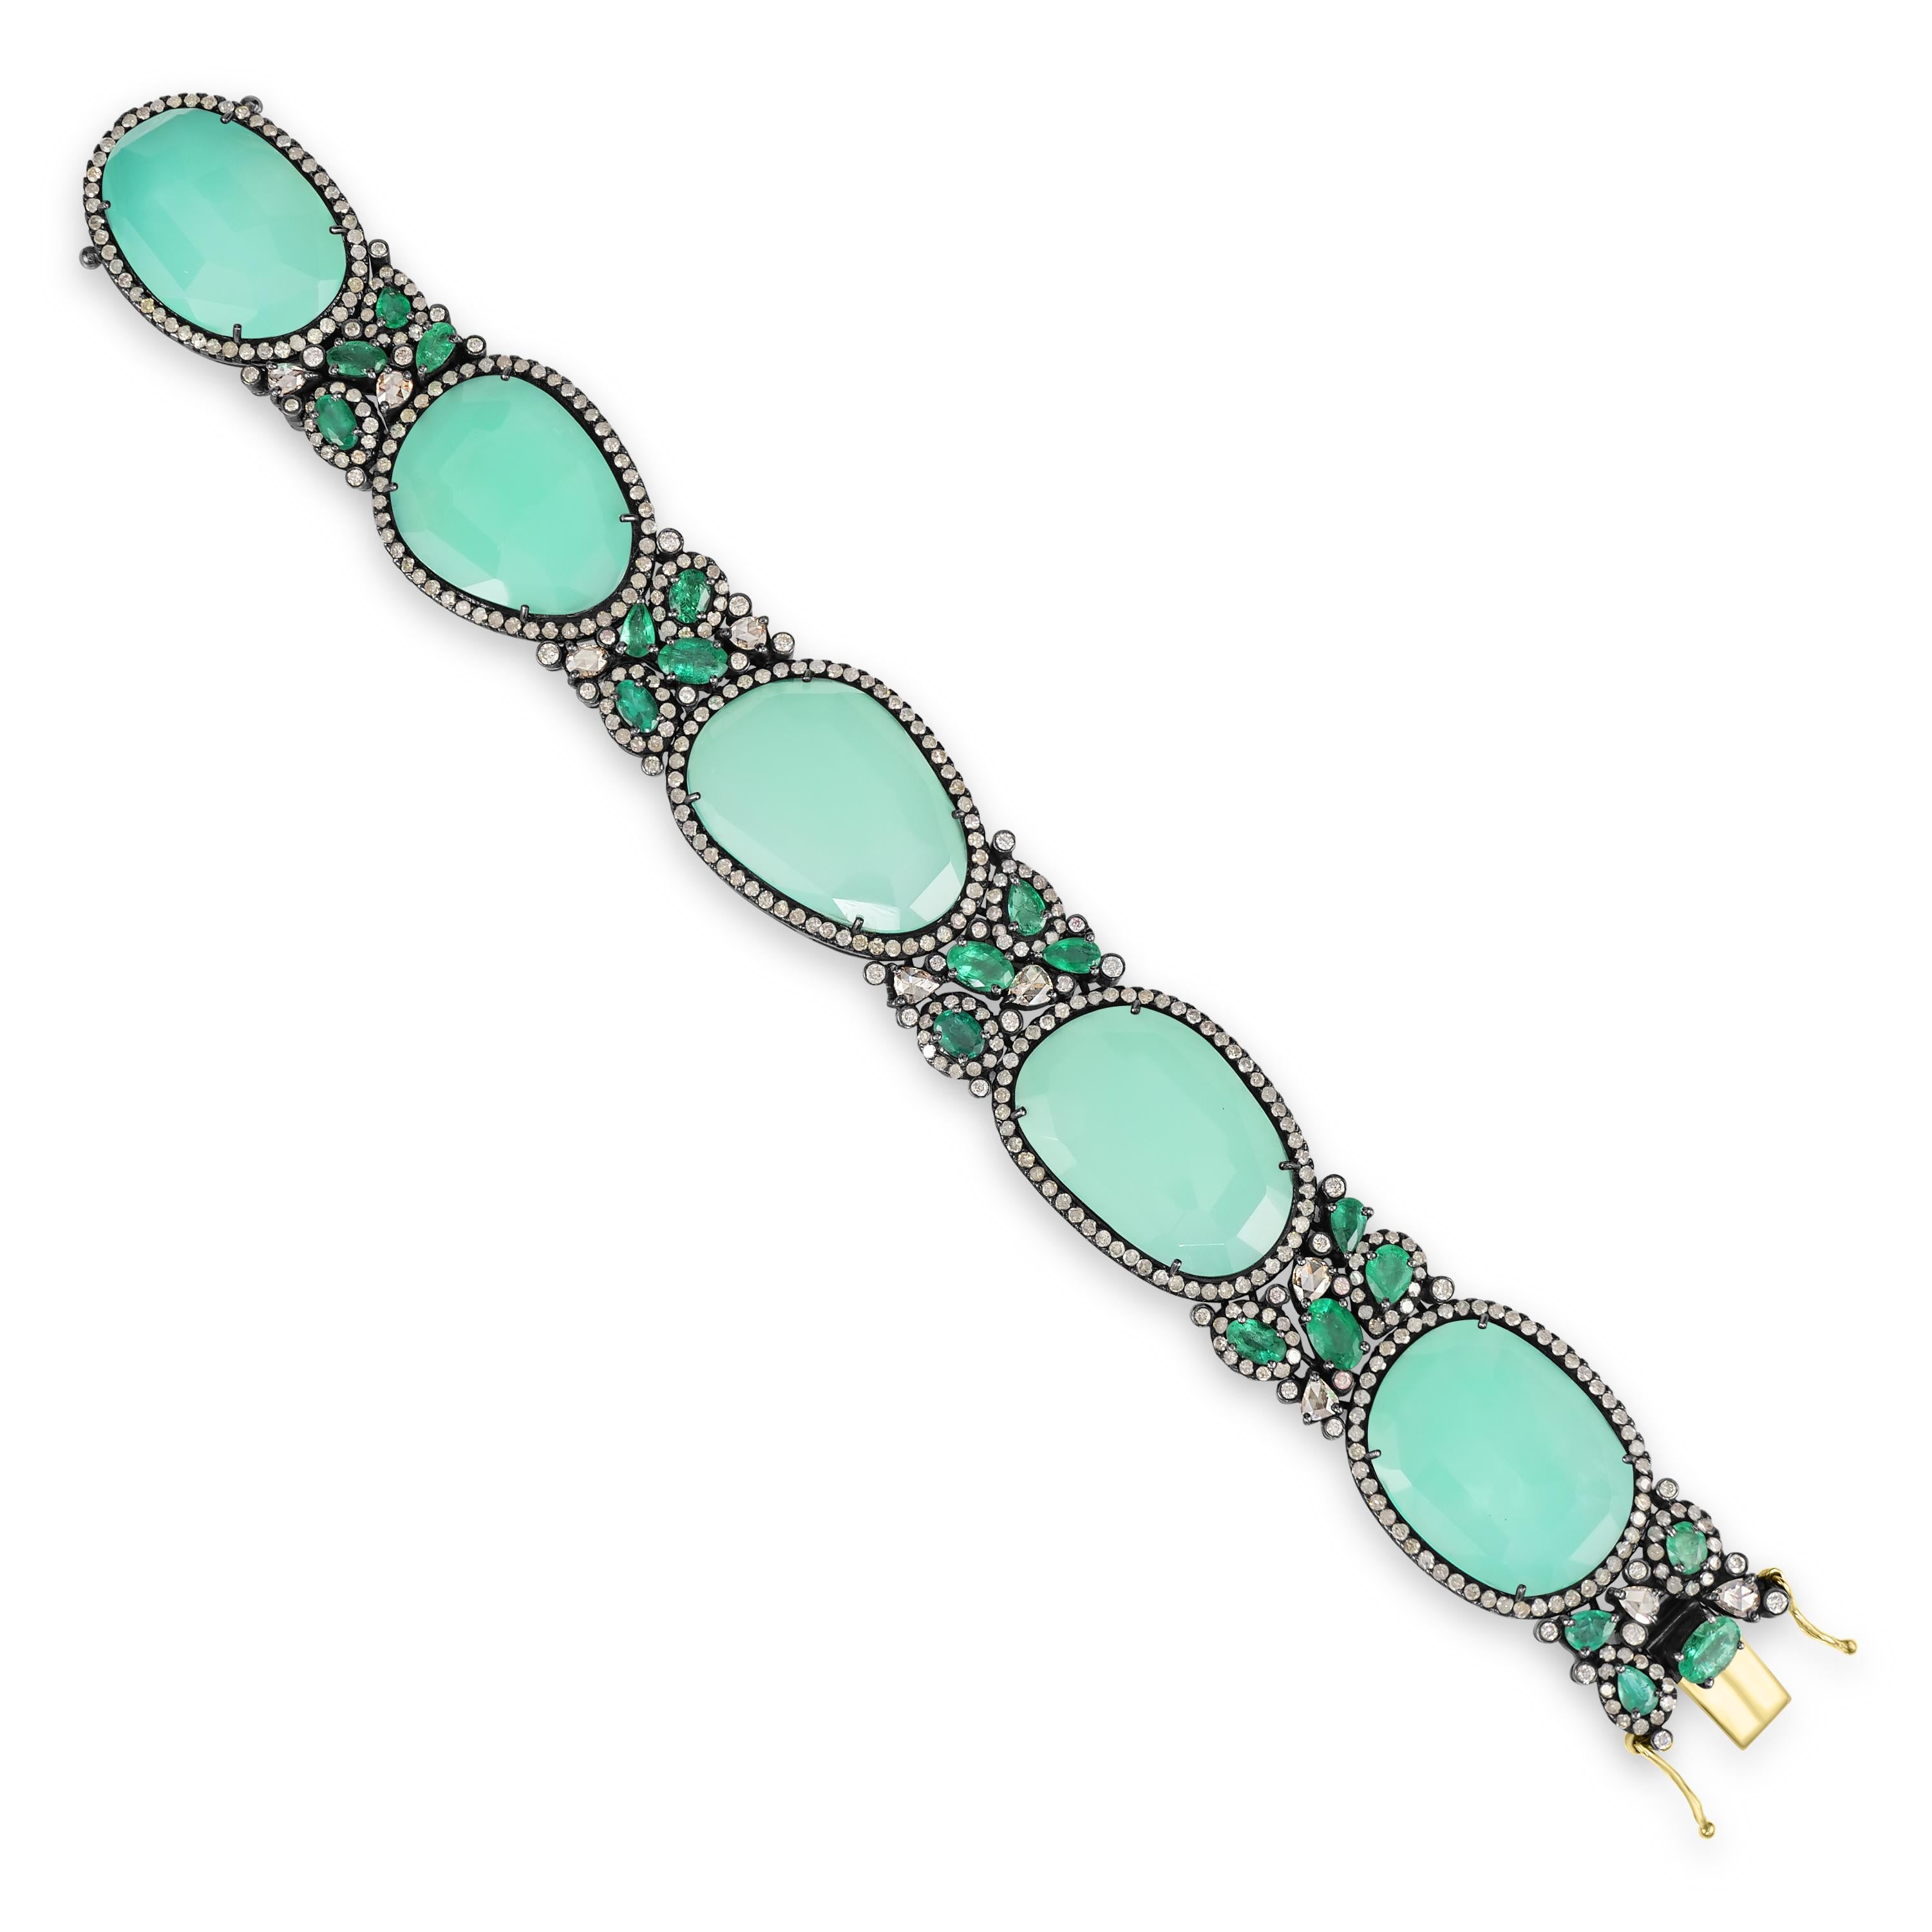 Introducing our exquisite Victorian 63 Cttw. Chrysoprase, Emerald, and Diamond Tennis Bracelet, a true masterpiece of elegance and sophistication.

Crafted with meticulous attention to detail, this bracelet features five mesmerizing chrysoprase